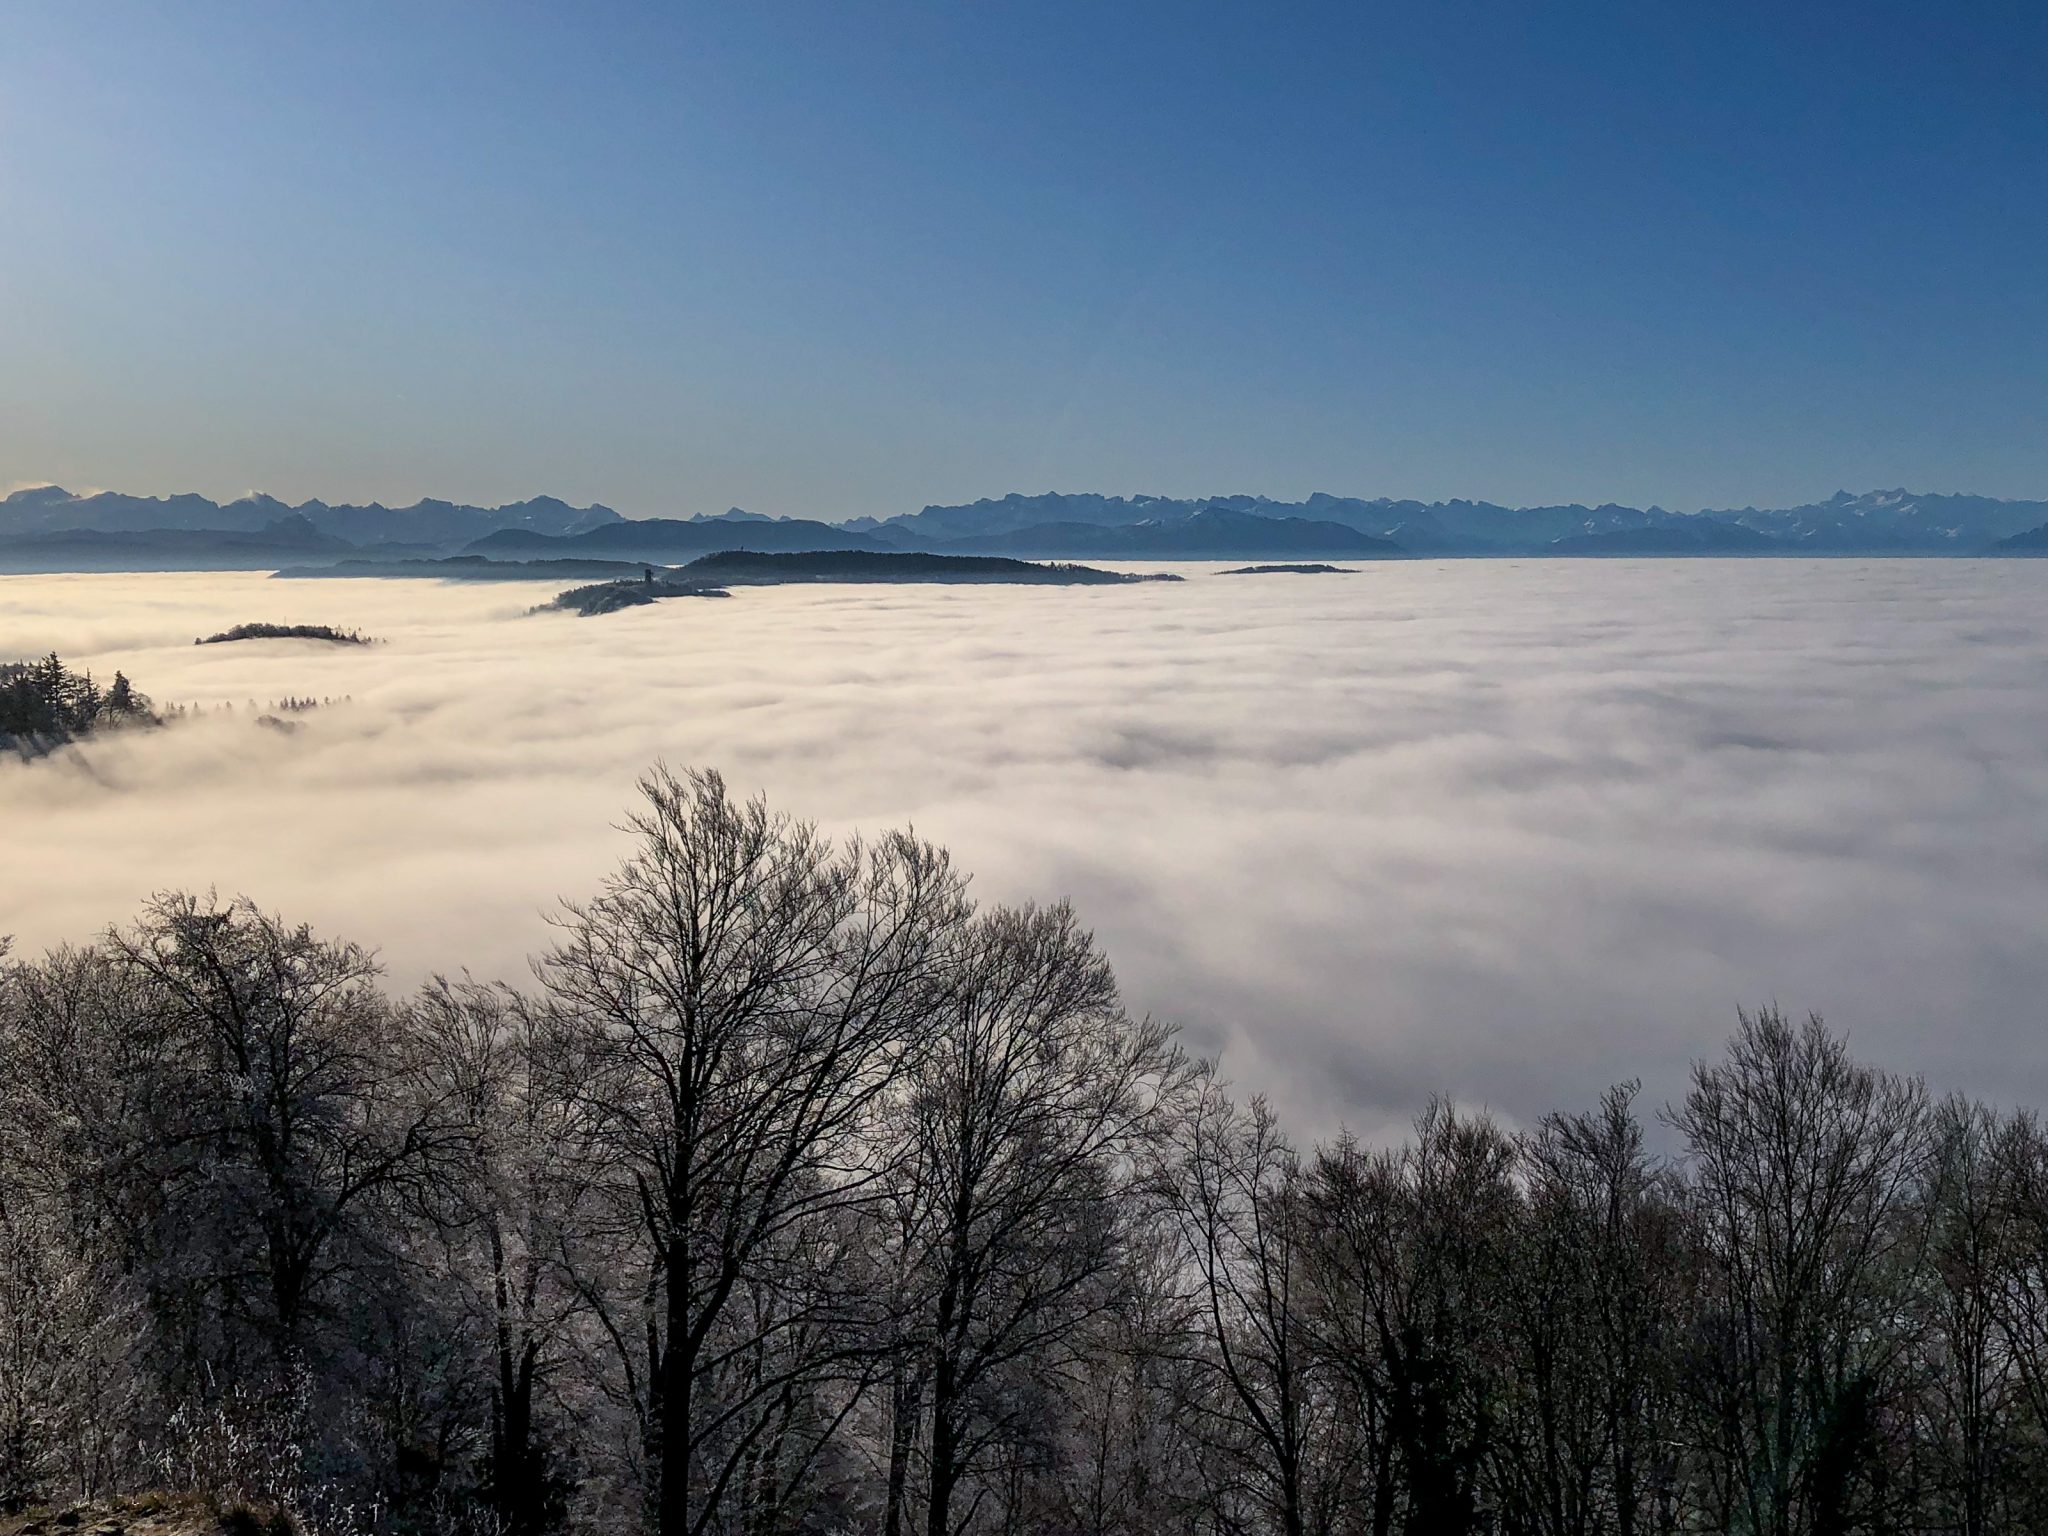 Sea of fog (view from Üetliberg, Zurich, towards the Swiss Alps)